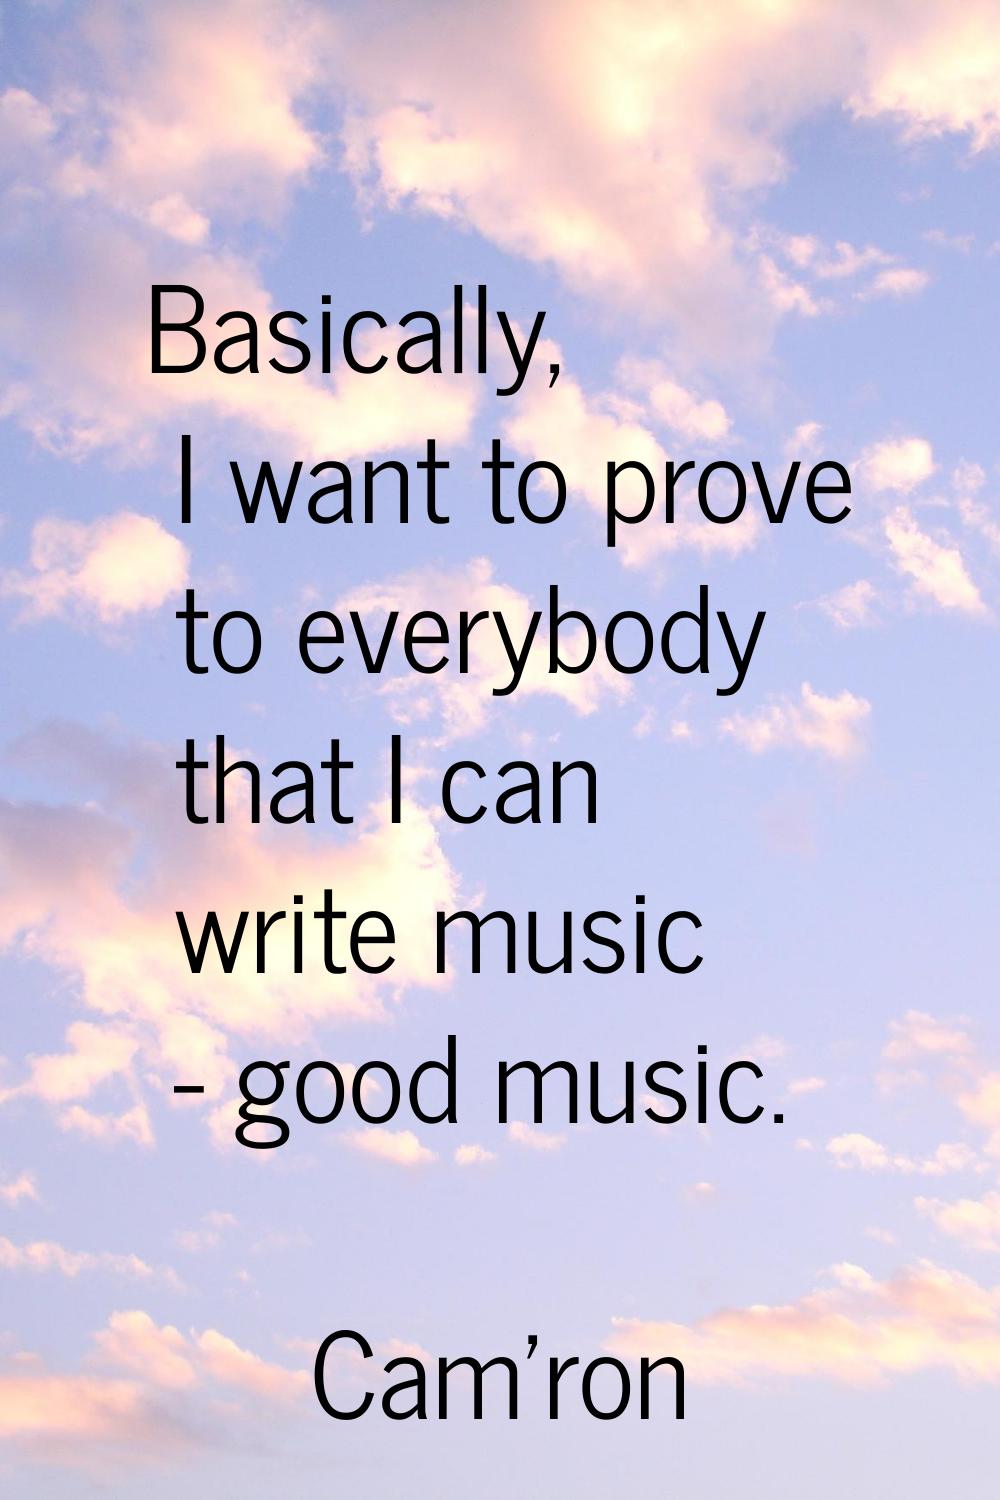 Basically, I want to prove to everybody that I can write music - good music.